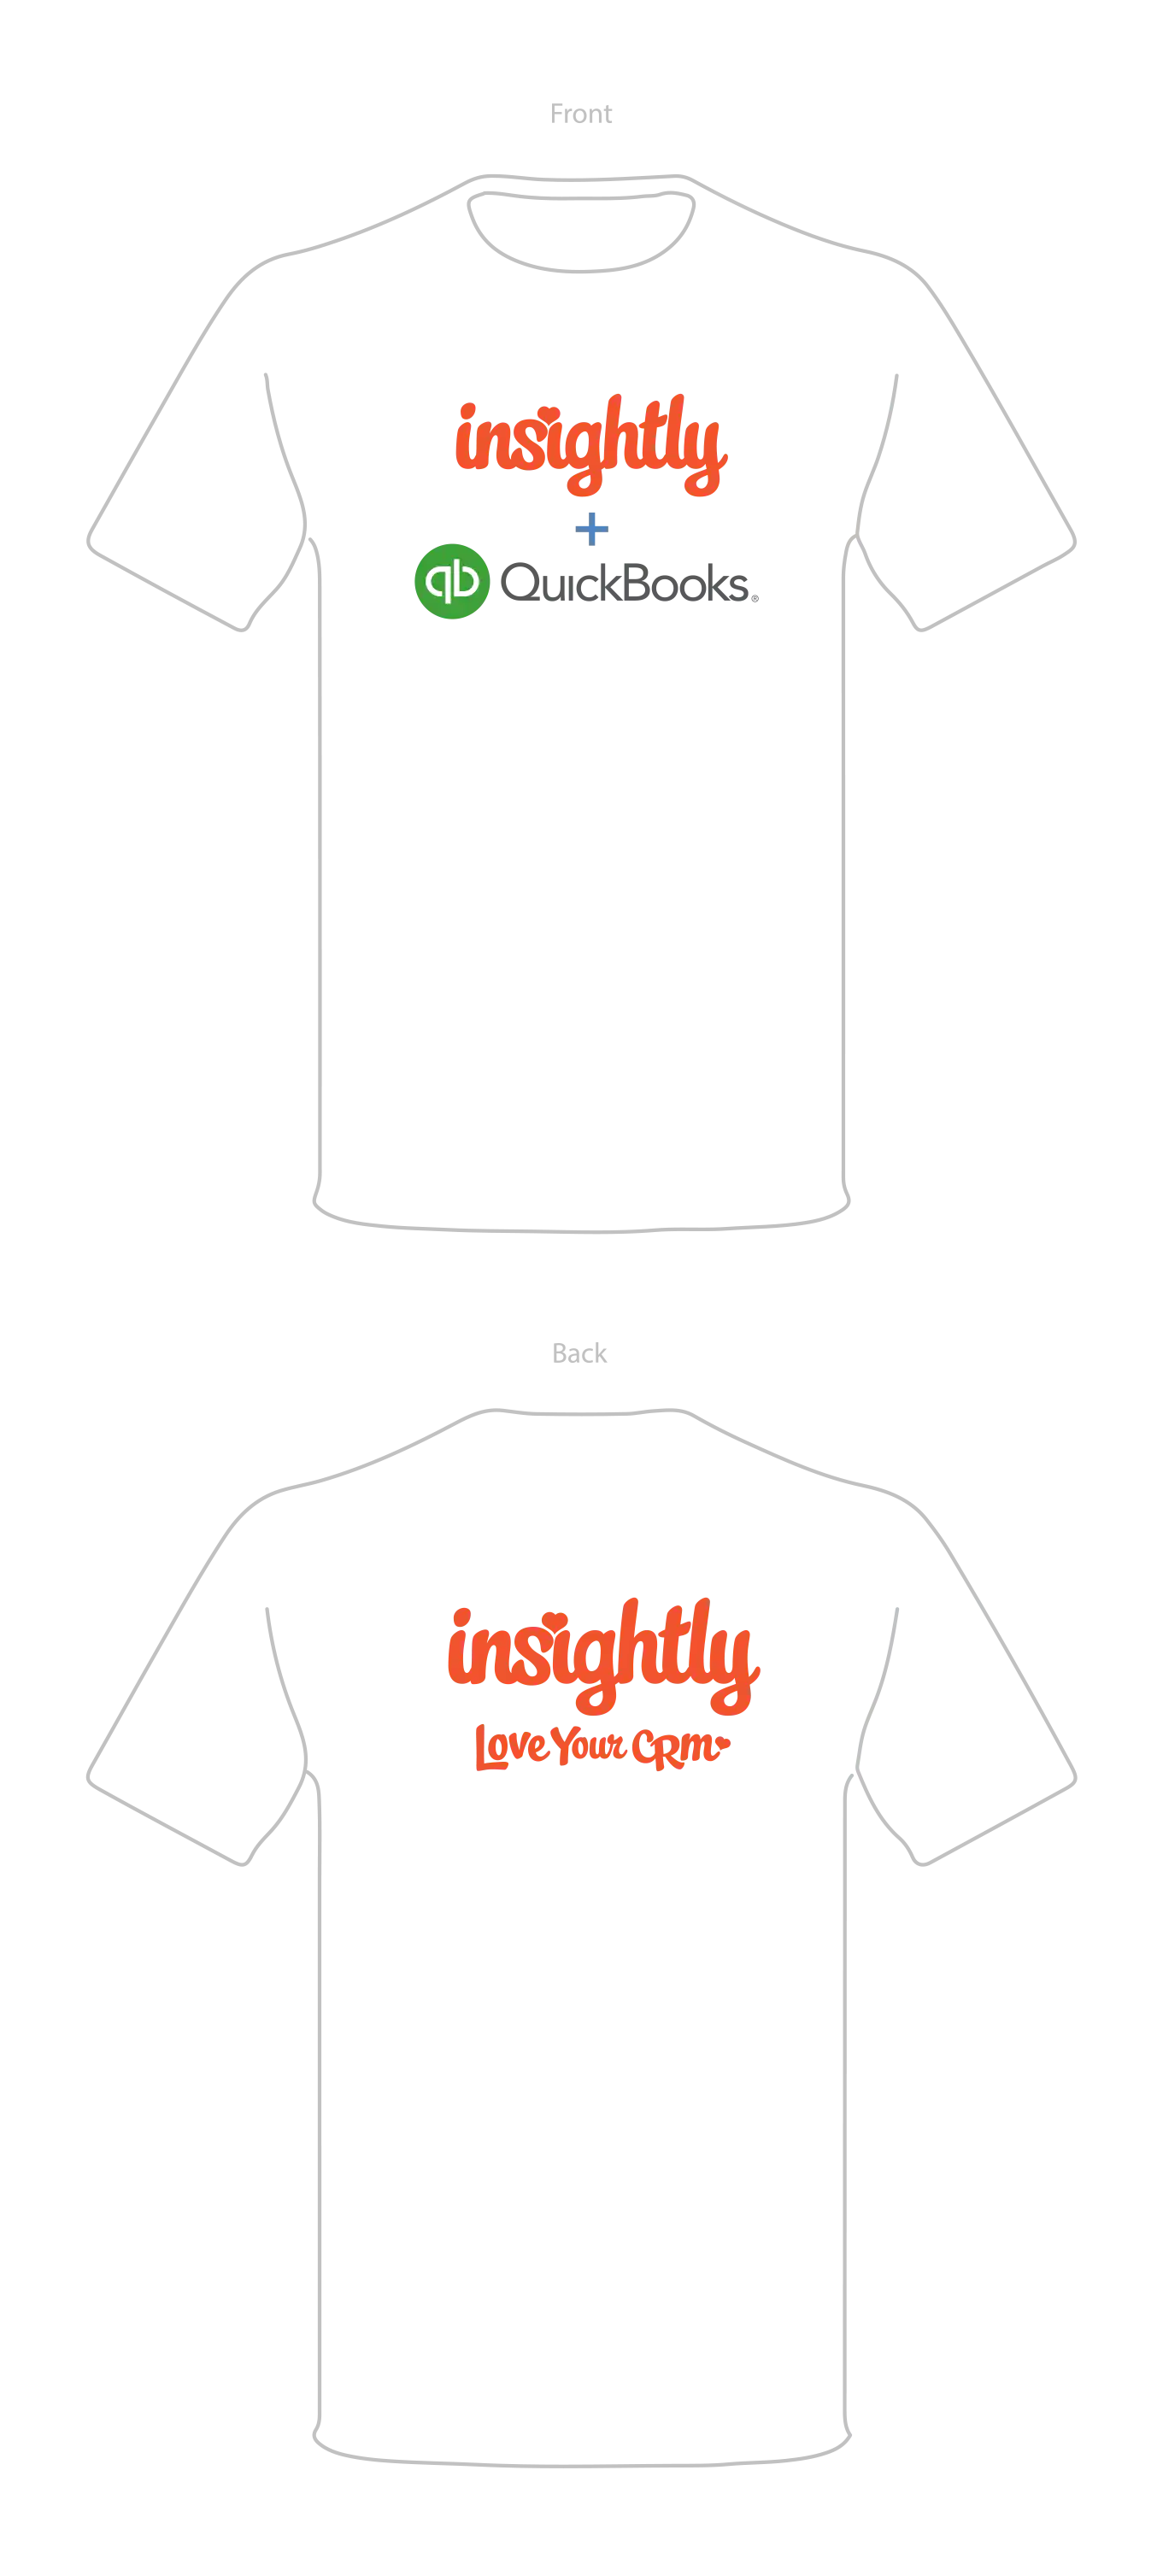 image showing what the graphics would look like on the front and back of a t-shirt